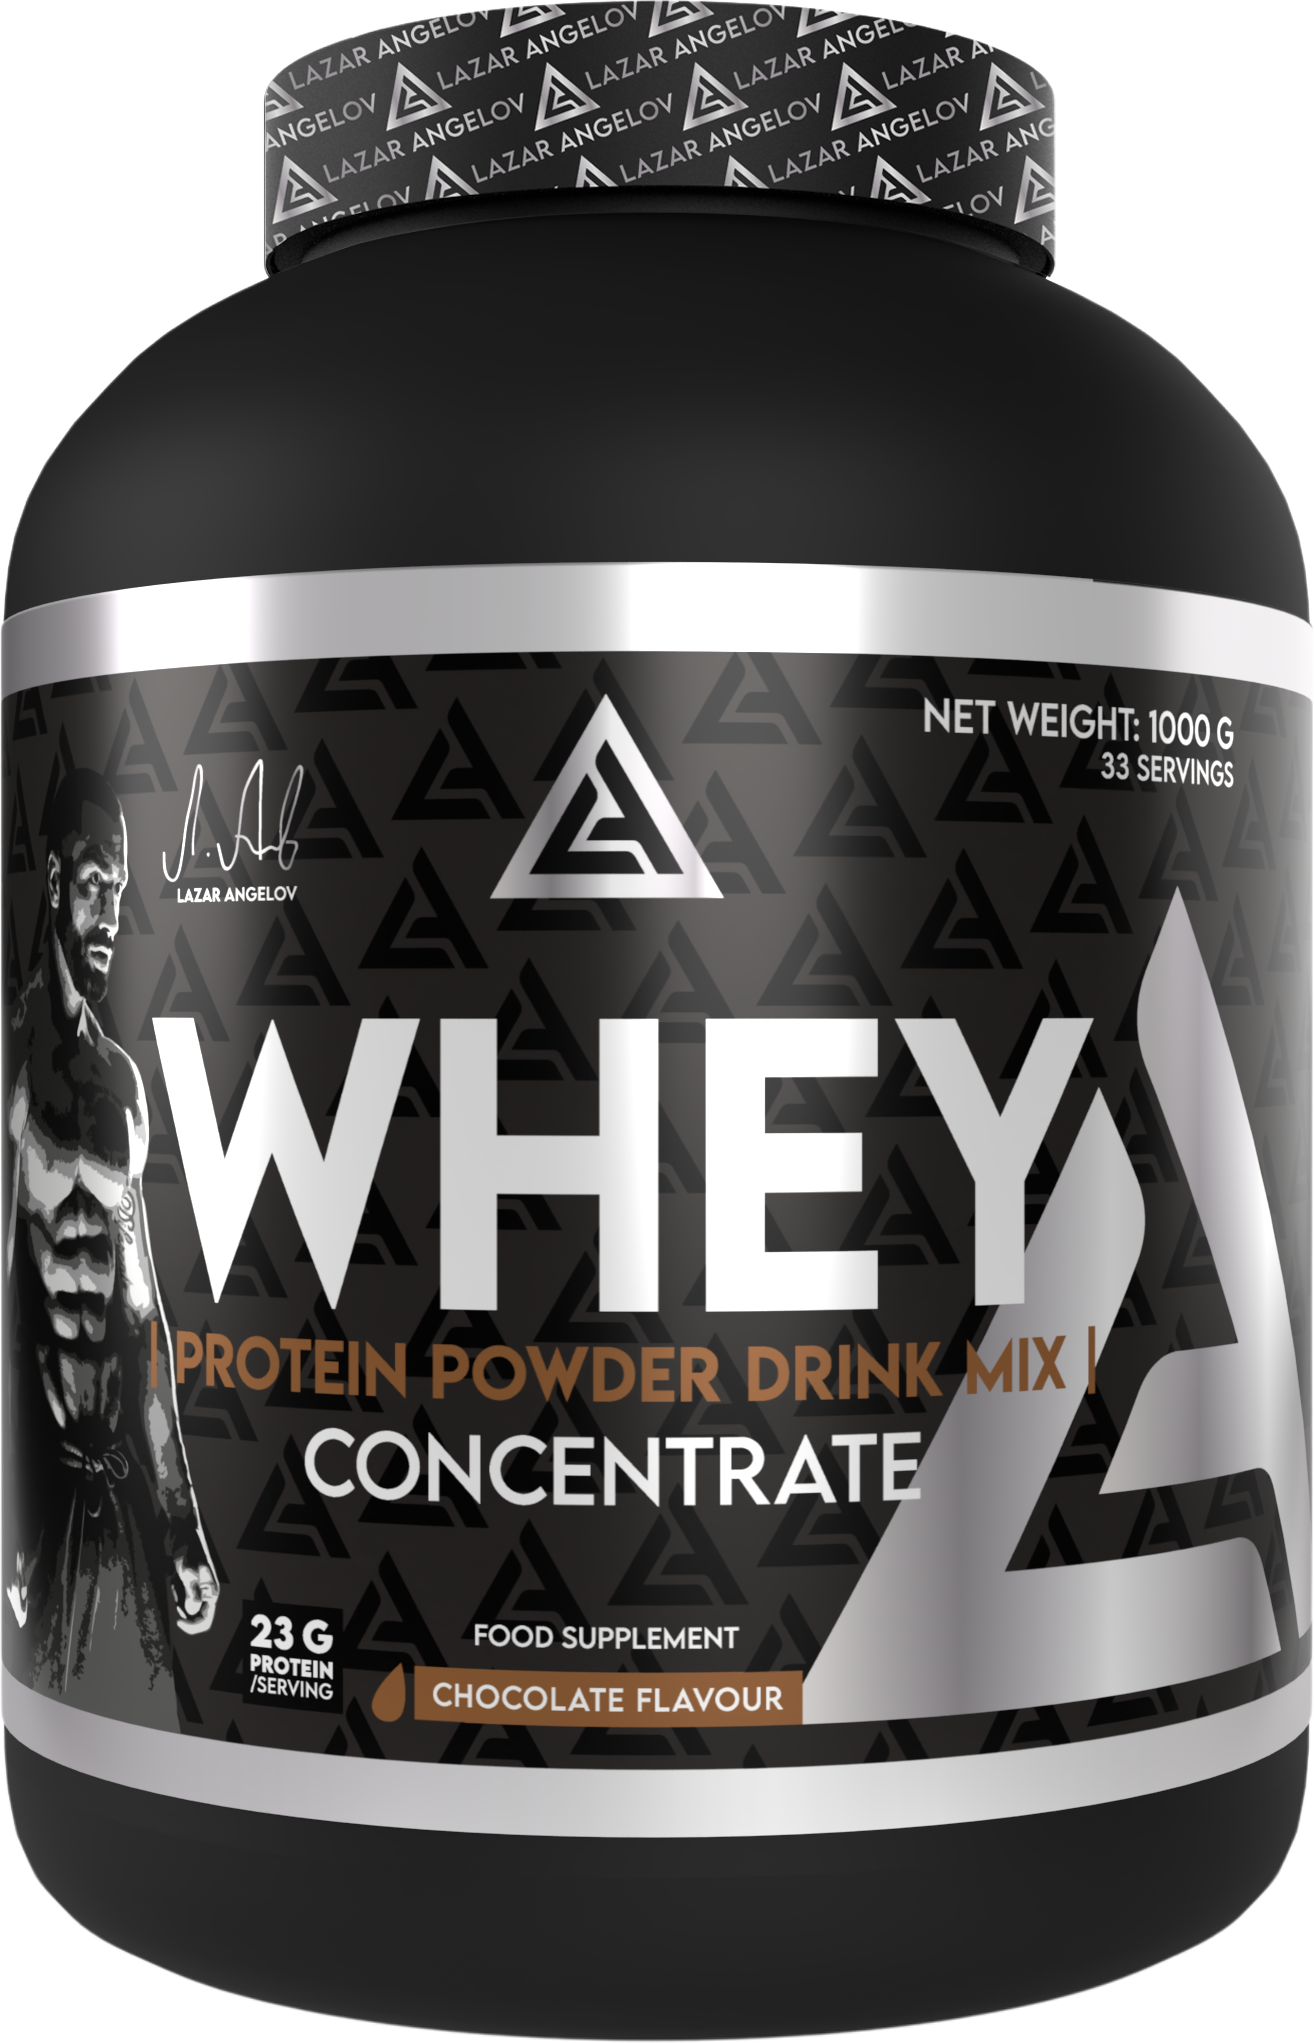 LA Whey Protein Powder Drink Mix | Concentrate - Шоколад